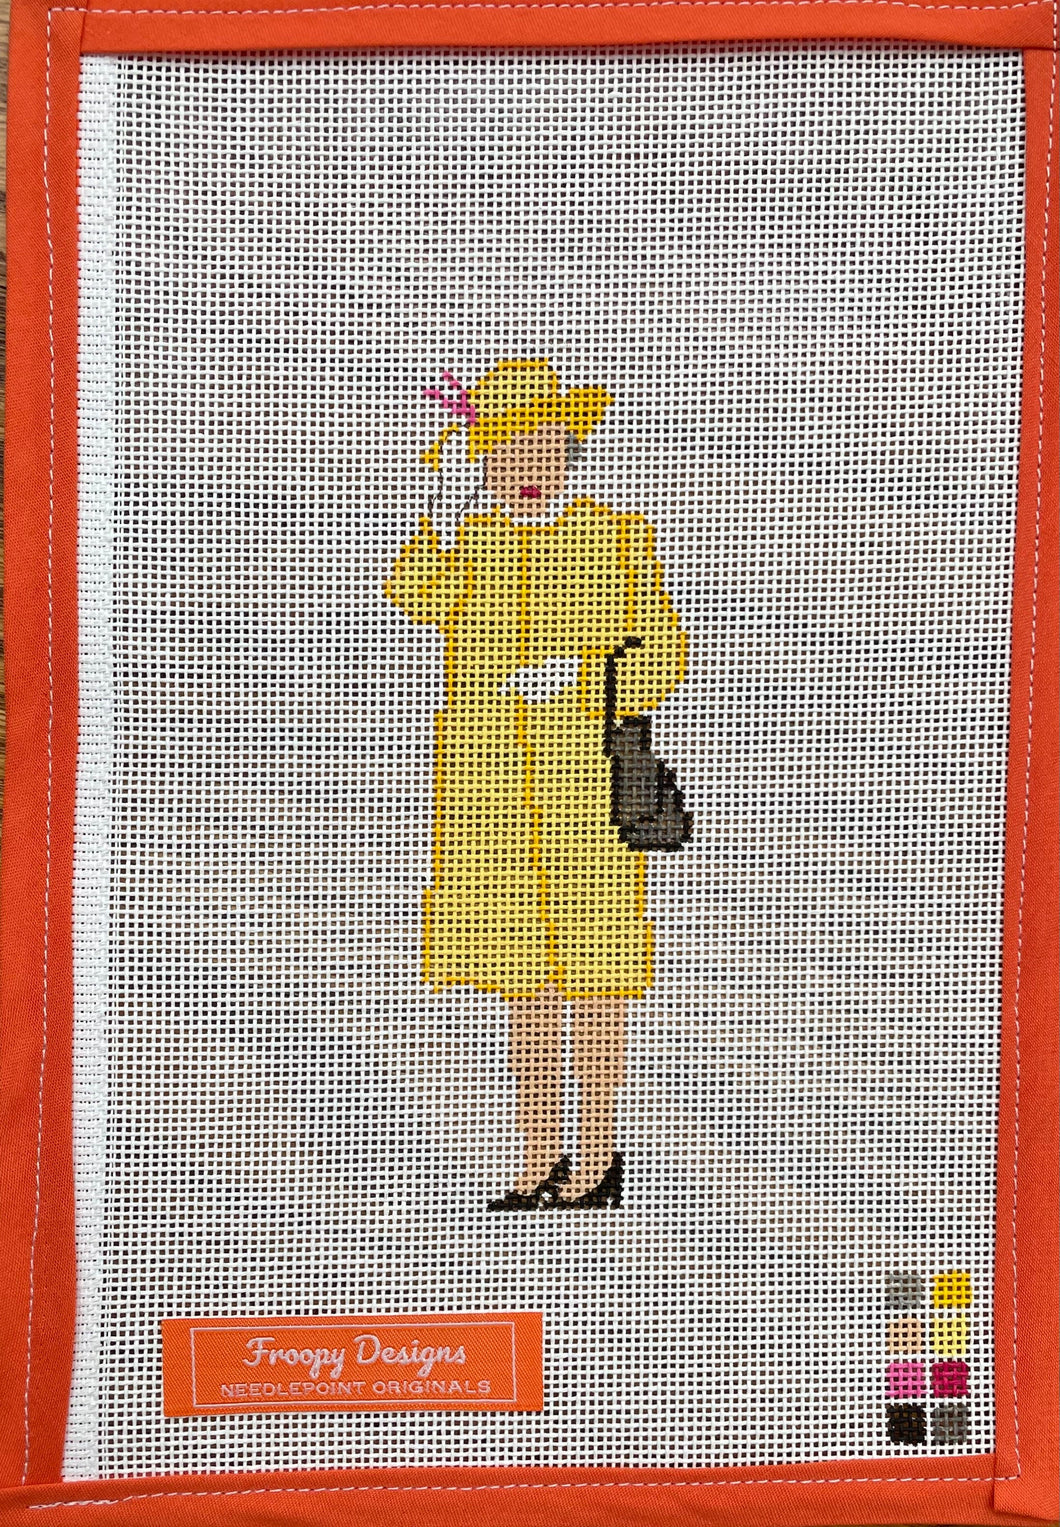 “HM ELIZABETH WAVES IN YELLOW”,  5.5” x 2.5” on 18 mesh or 7.75” x 3.5” on 13 mesh